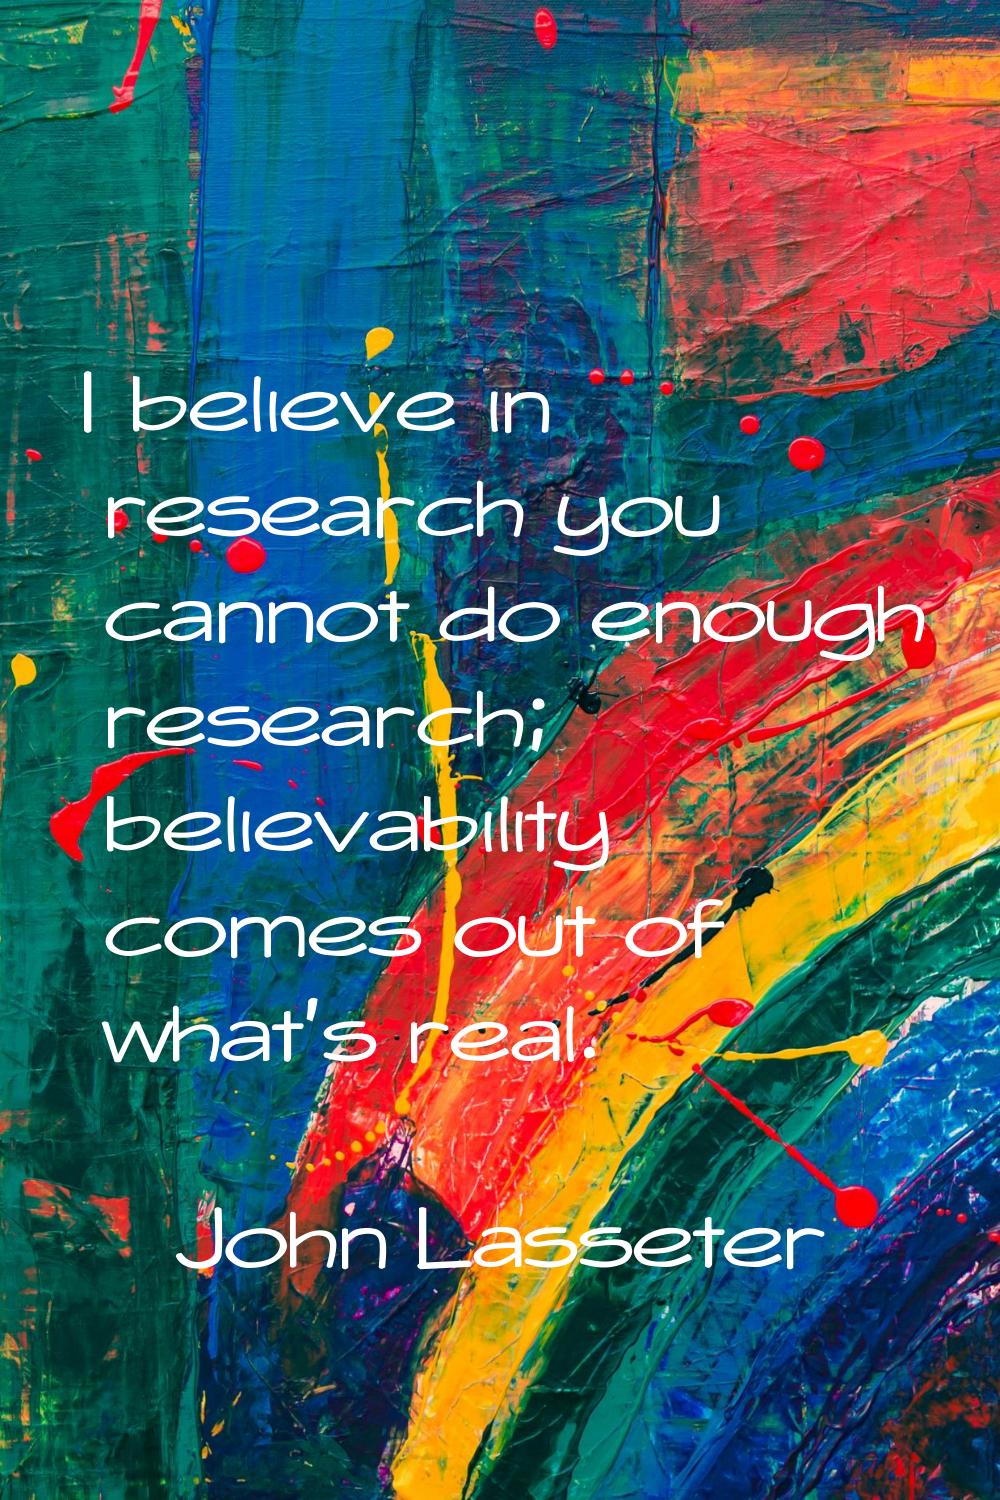 I believe in research you cannot do enough research; believability comes out of what's real.